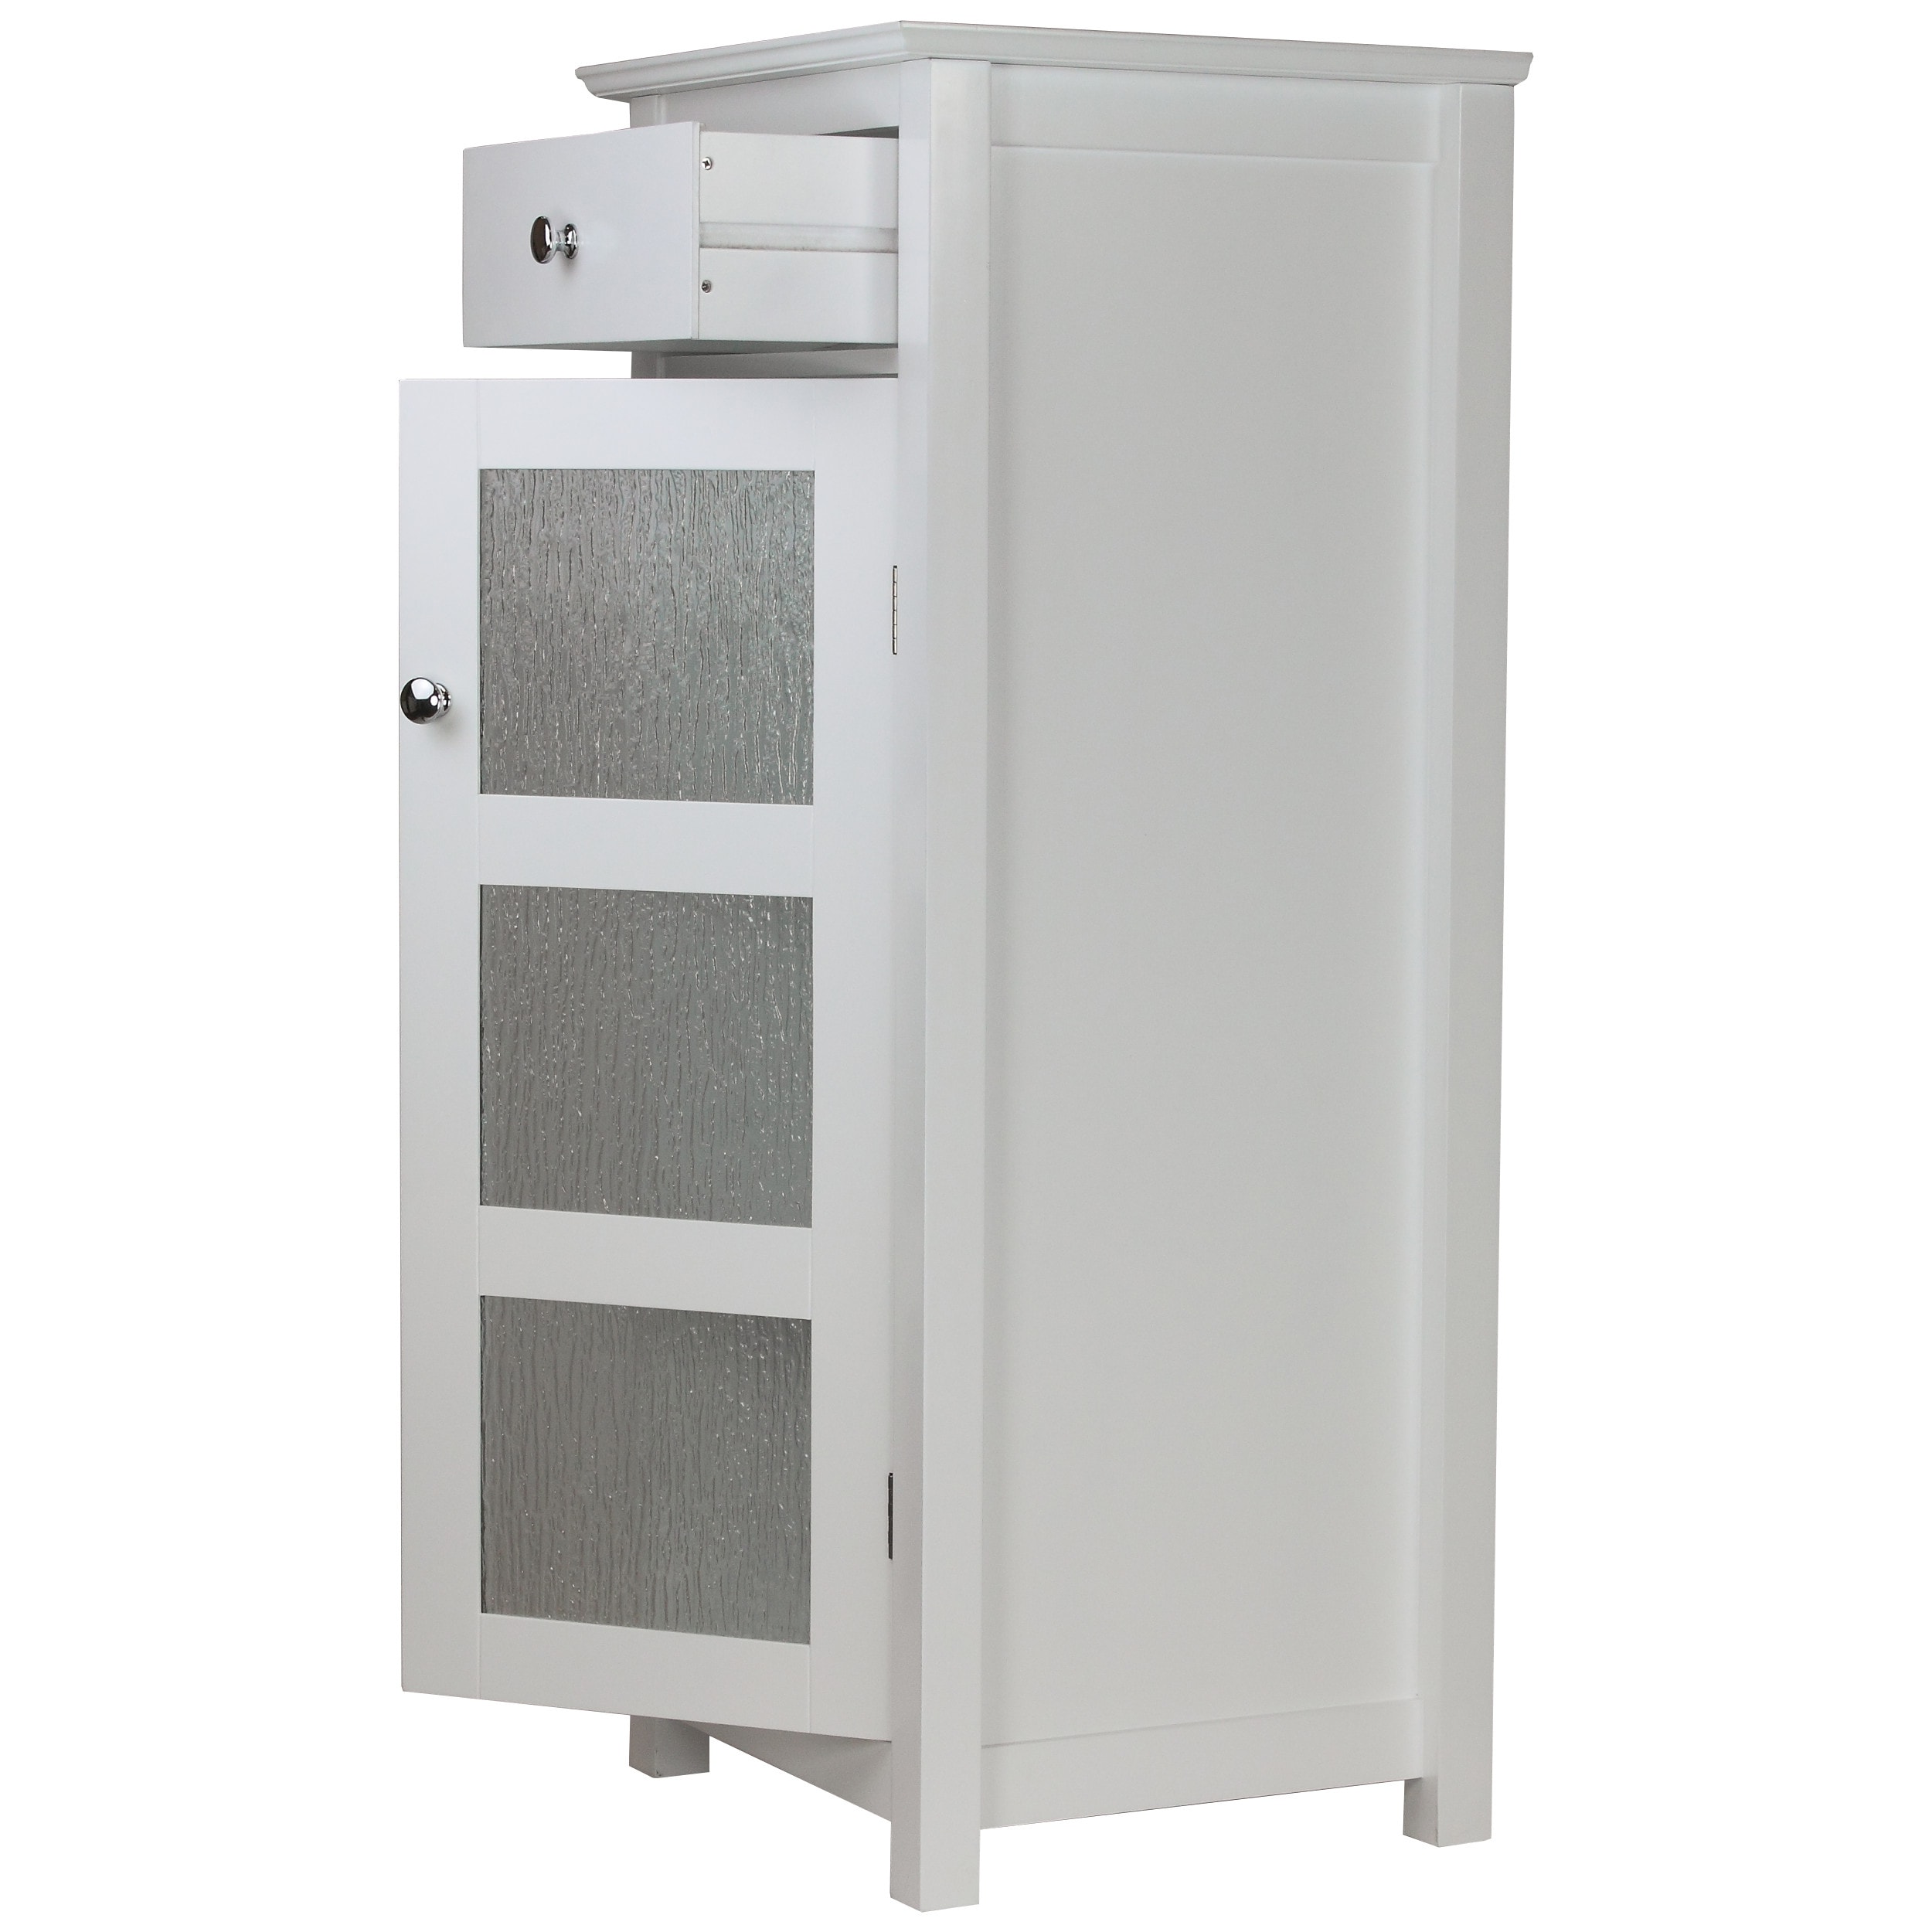 https://ak1.ostkcdn.com/images/products/8162158/Highland-One-Drawer-Floor-Cabinet-2f8e7b5a-fd84-49b5-ad3d-6a0e91c54680.jpg